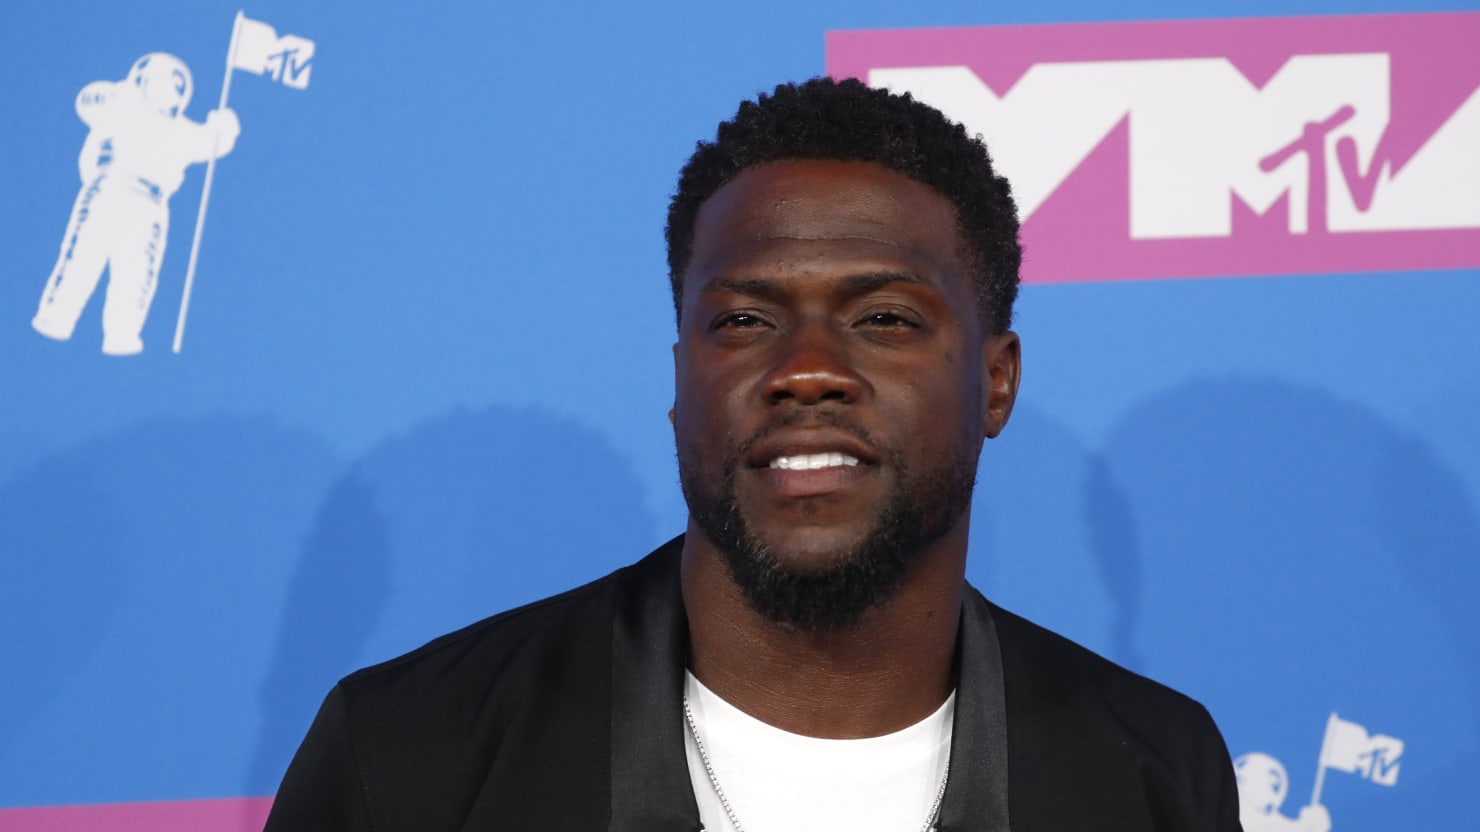 Kevin Hart’s Sex Tape Partner Sues For 60 Million Claims He Recorded